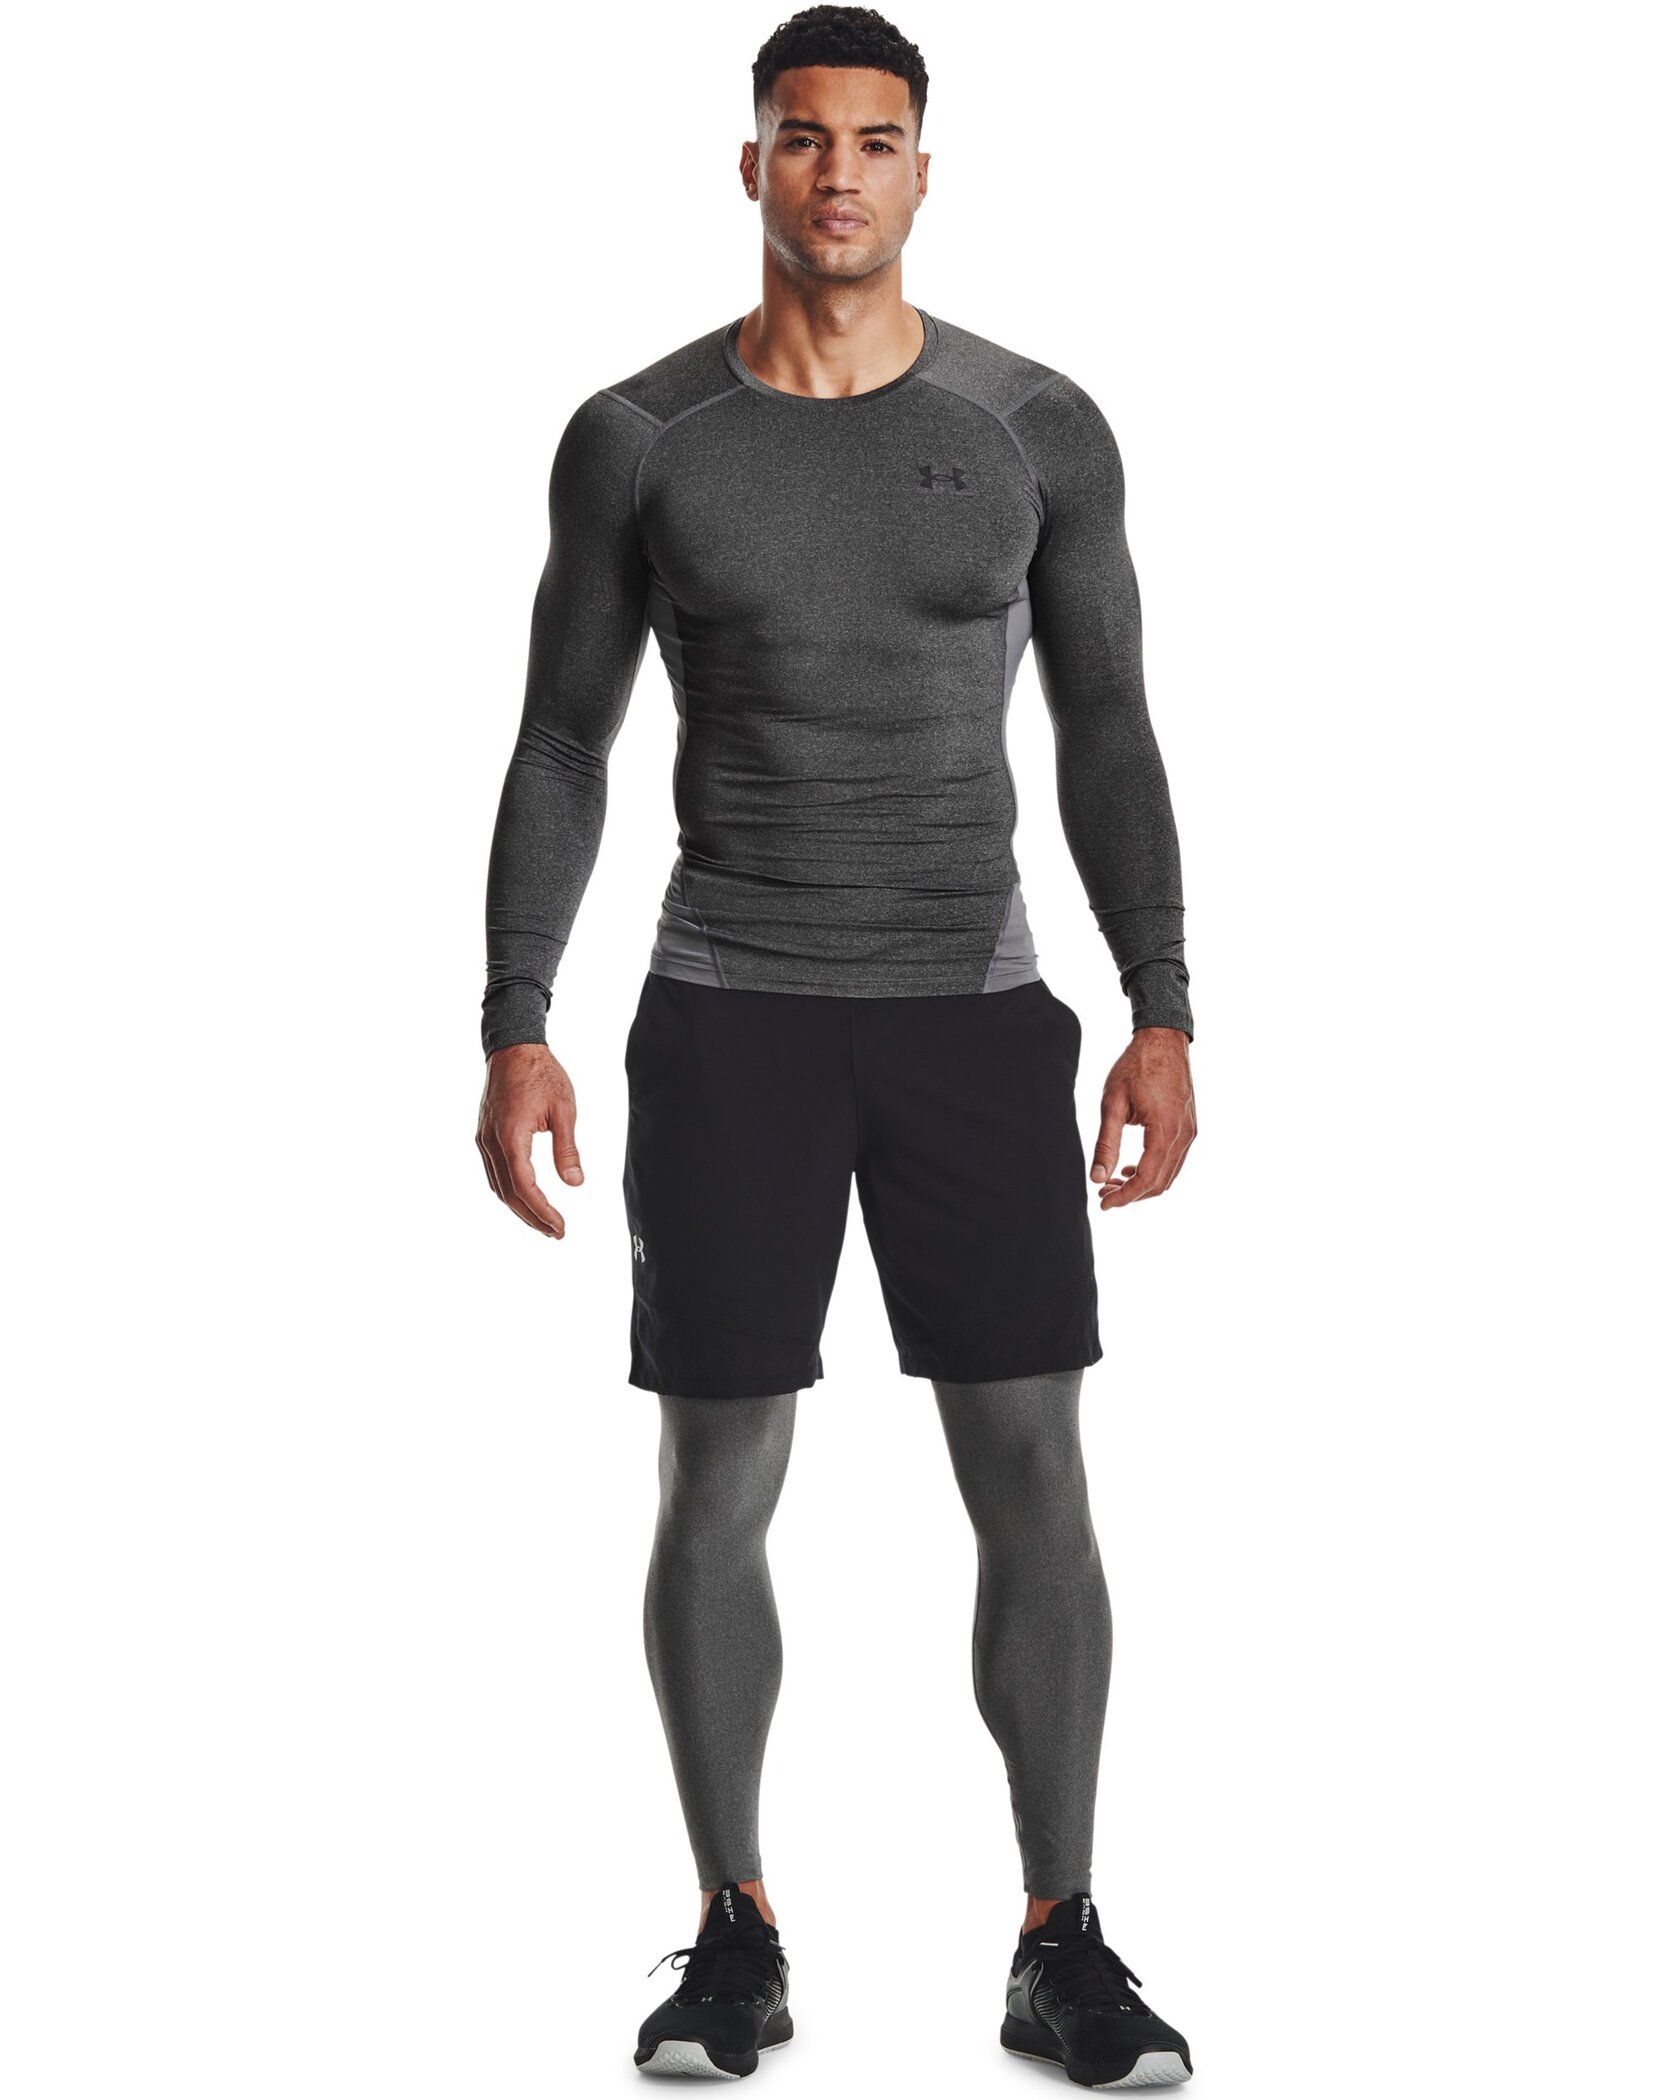 Order Online UA HeatGear Armour Leggings From Under Armour India